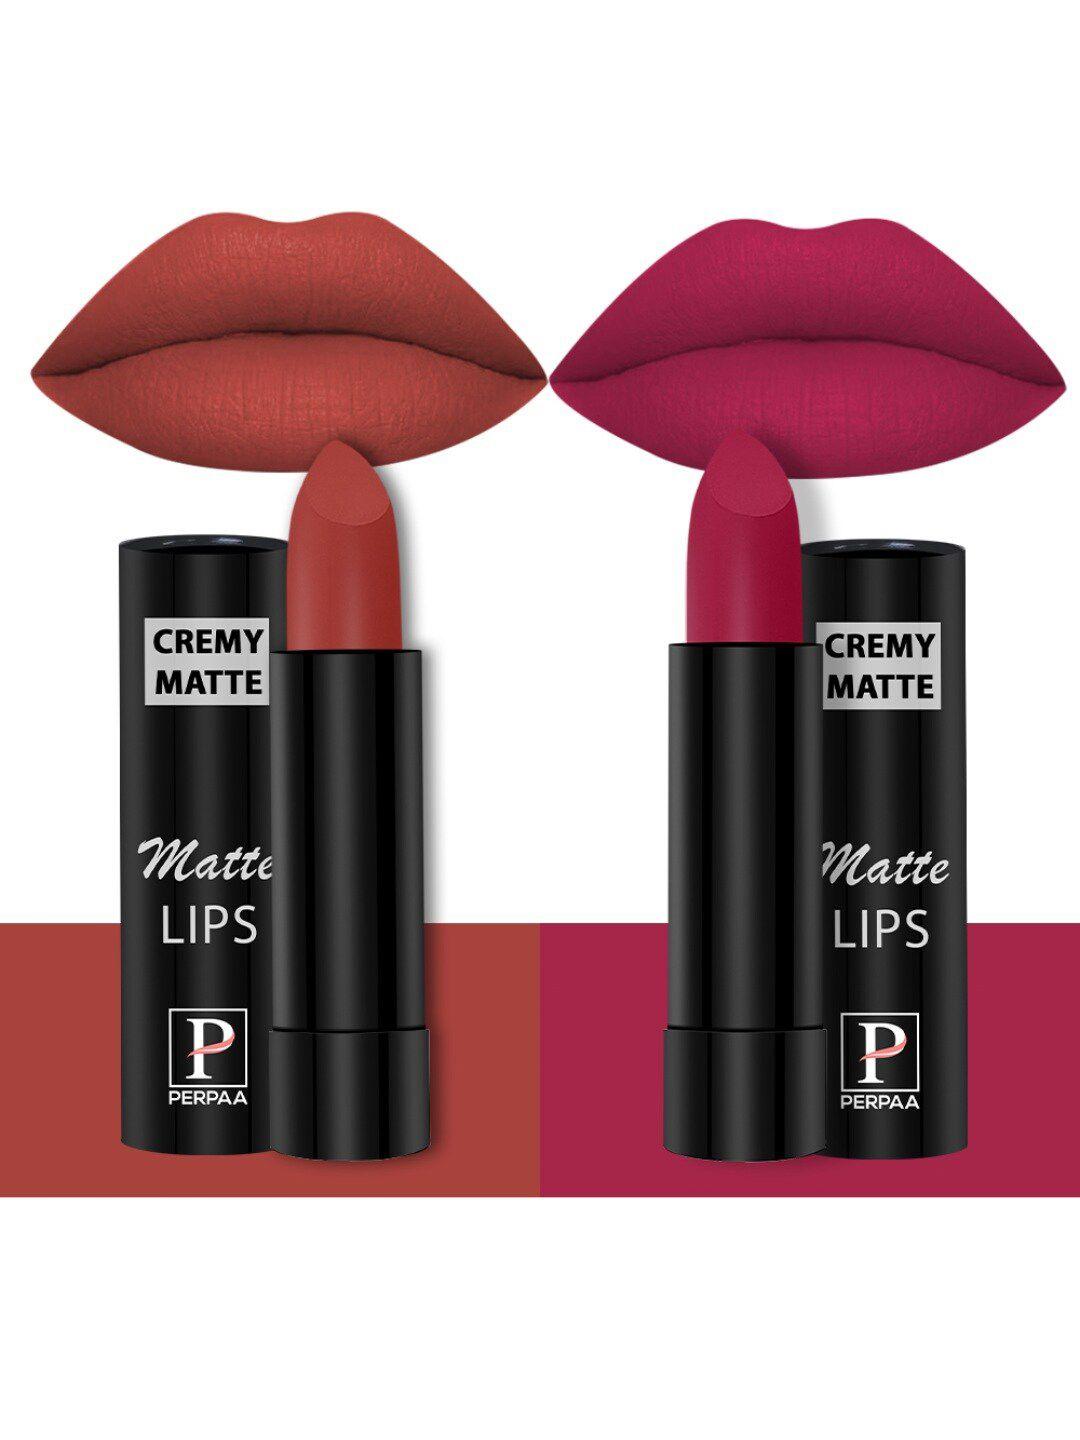 perpaa set of 2 creamy matte bullet lipstick - 3.5g each - red bloom 55 - ruby magenta 84